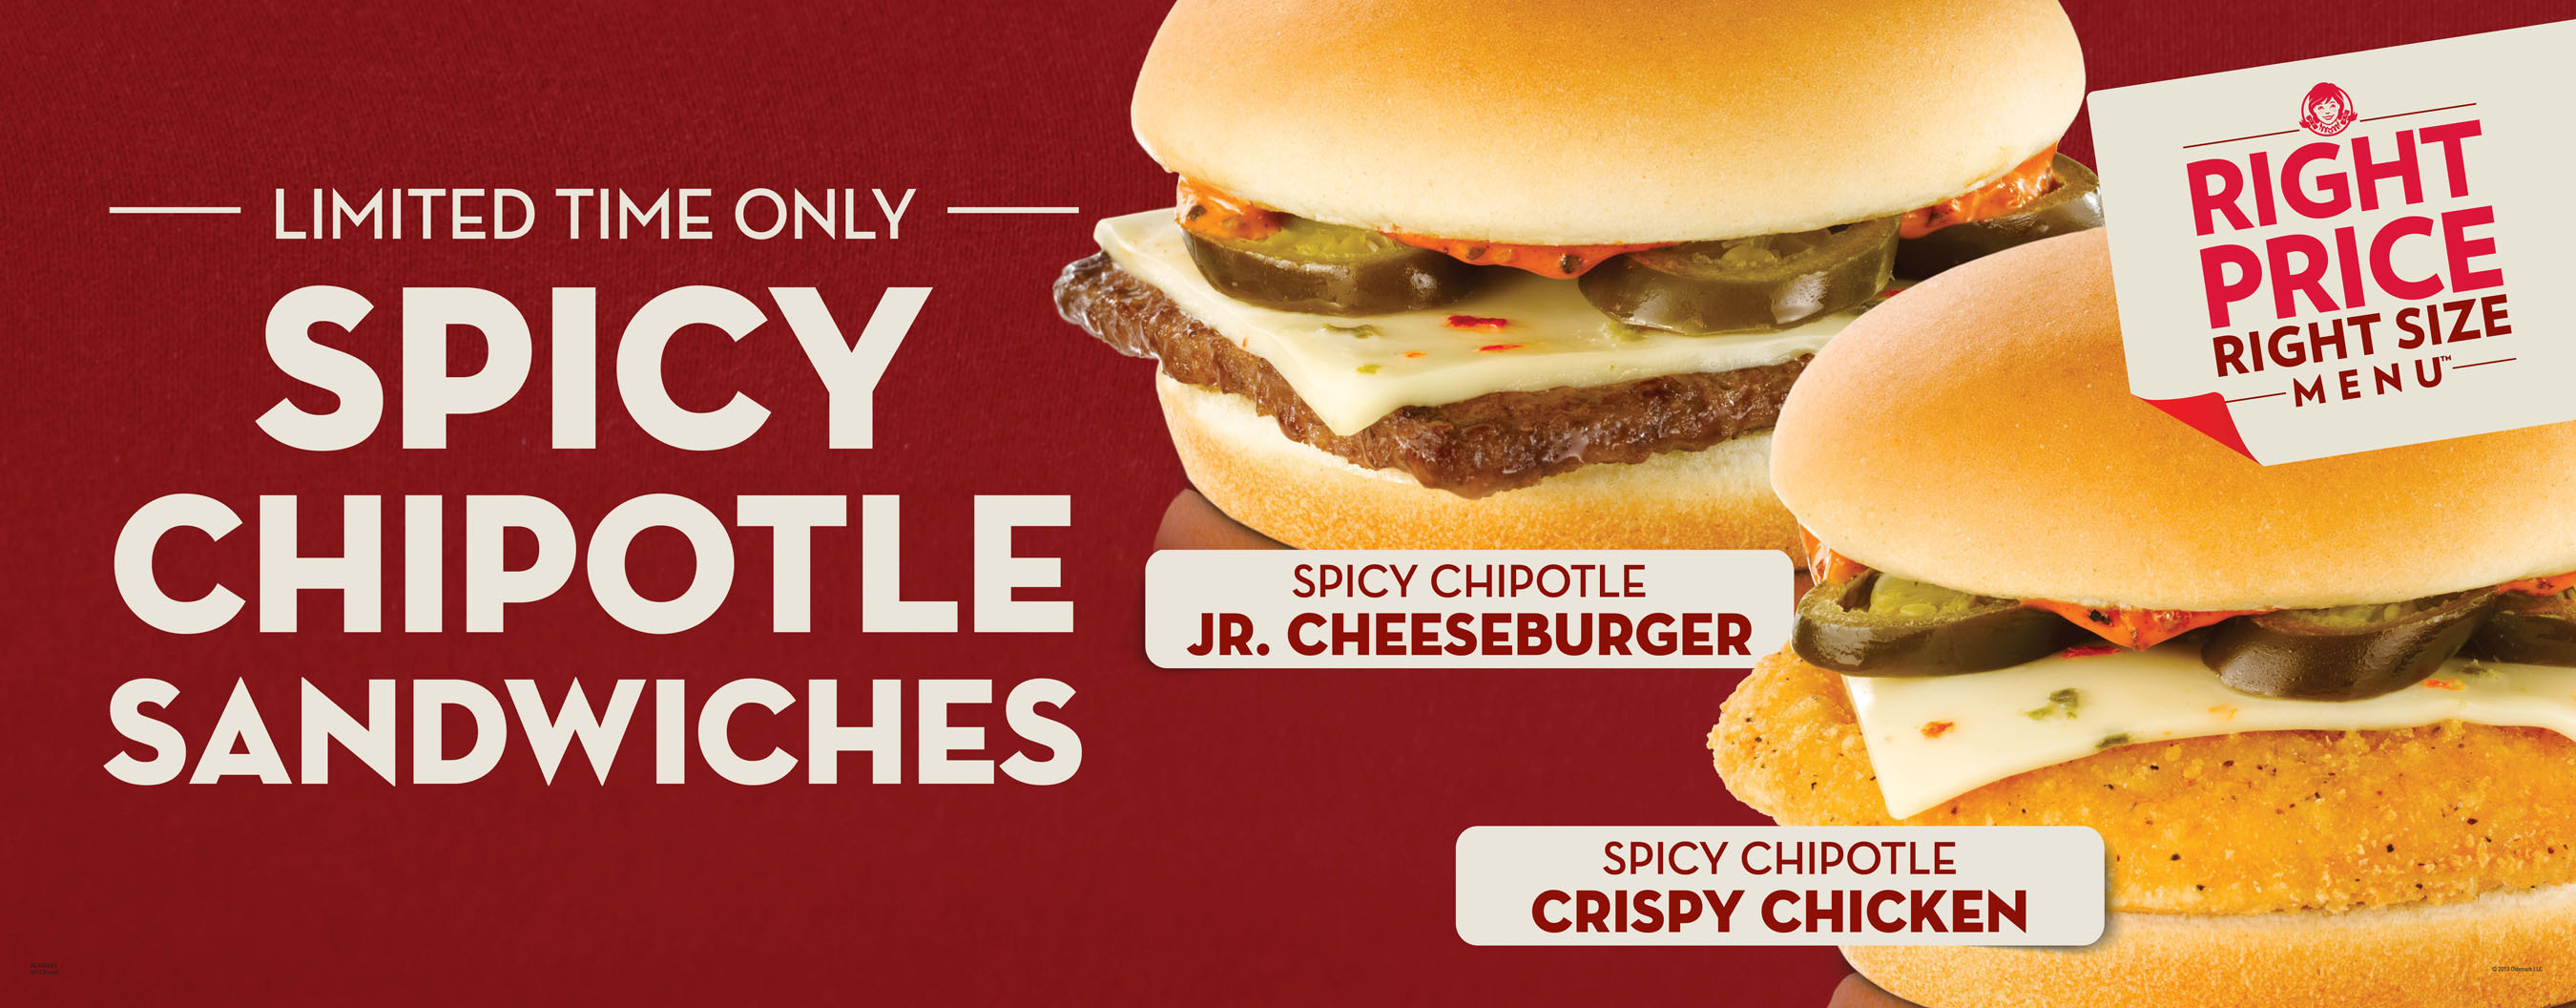 Wendy's spices up its Right Price Right Size Menu(tm) with two new zesty choices: the Spicy Chipotle Crispy Chicken Sandwich and the Spicy Chipotle Jr. Cheeseburger. Available for a limited time, both 99-cent heat-seeking additions feature a unique taste you can't find in quick service - including melted Pepper Jack Cheese, zesty jalapenos and a signature spicy sauce on top of juicy beef or a crispy chicken fillet. (PRNewsFoto/The Wendy's Company) (PRNewsFoto/THE WENDY'S COMPANY)